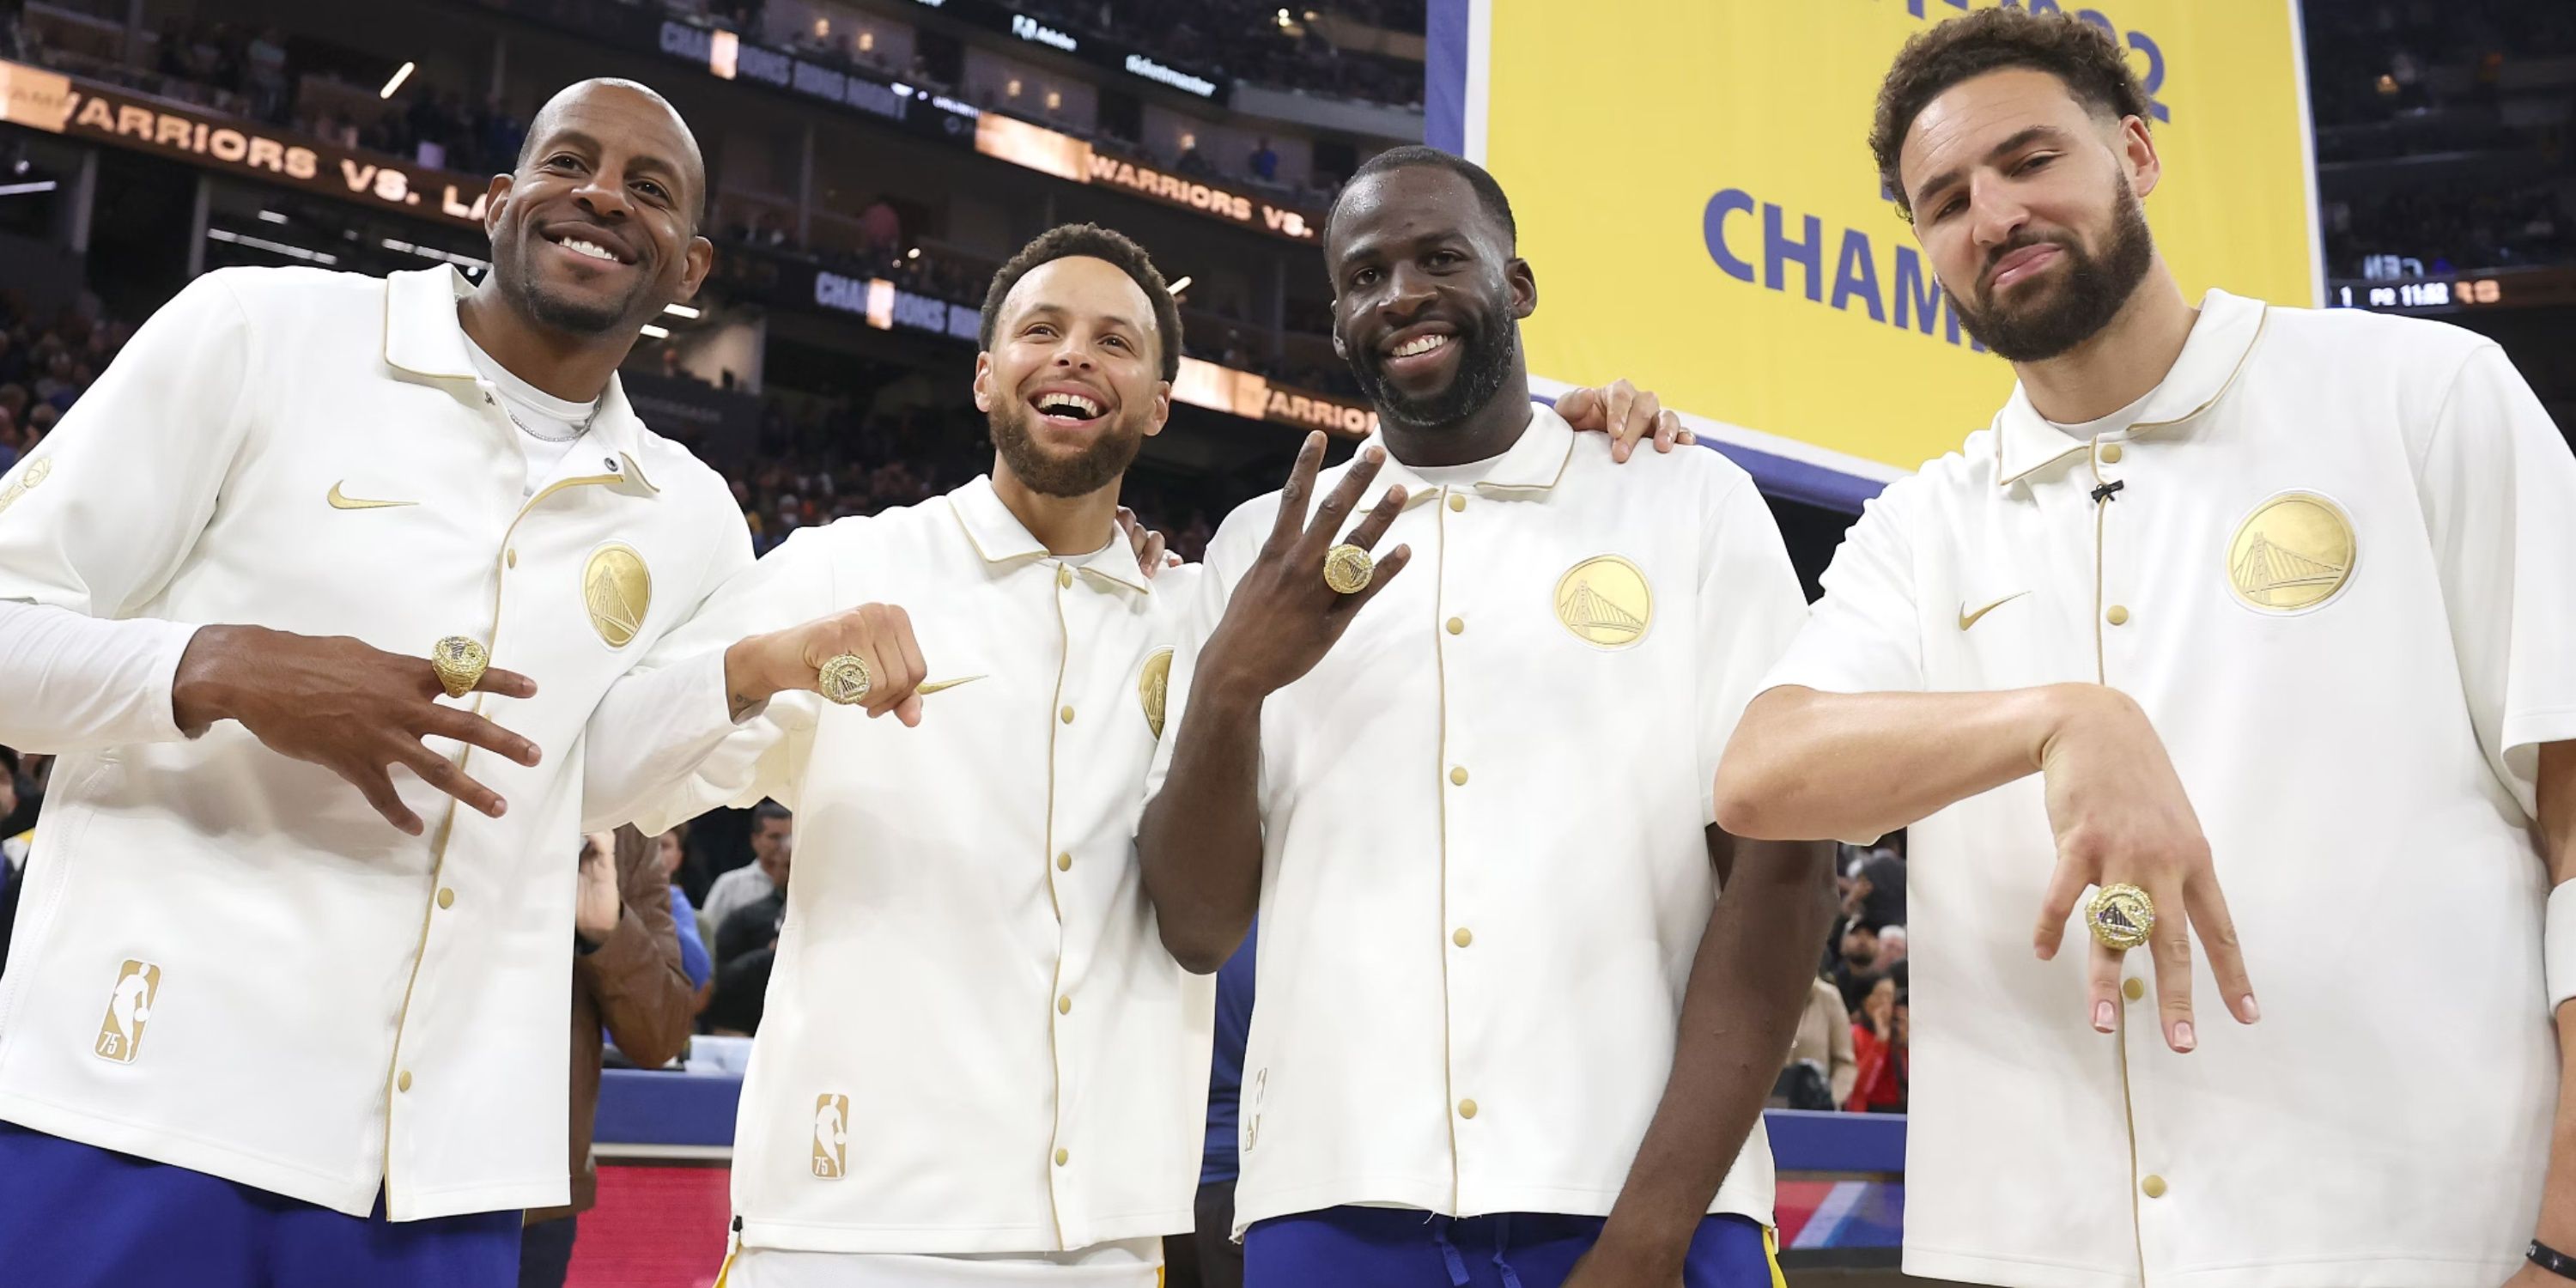 5 Bright Spots about every NBA team: Golden State Warriors